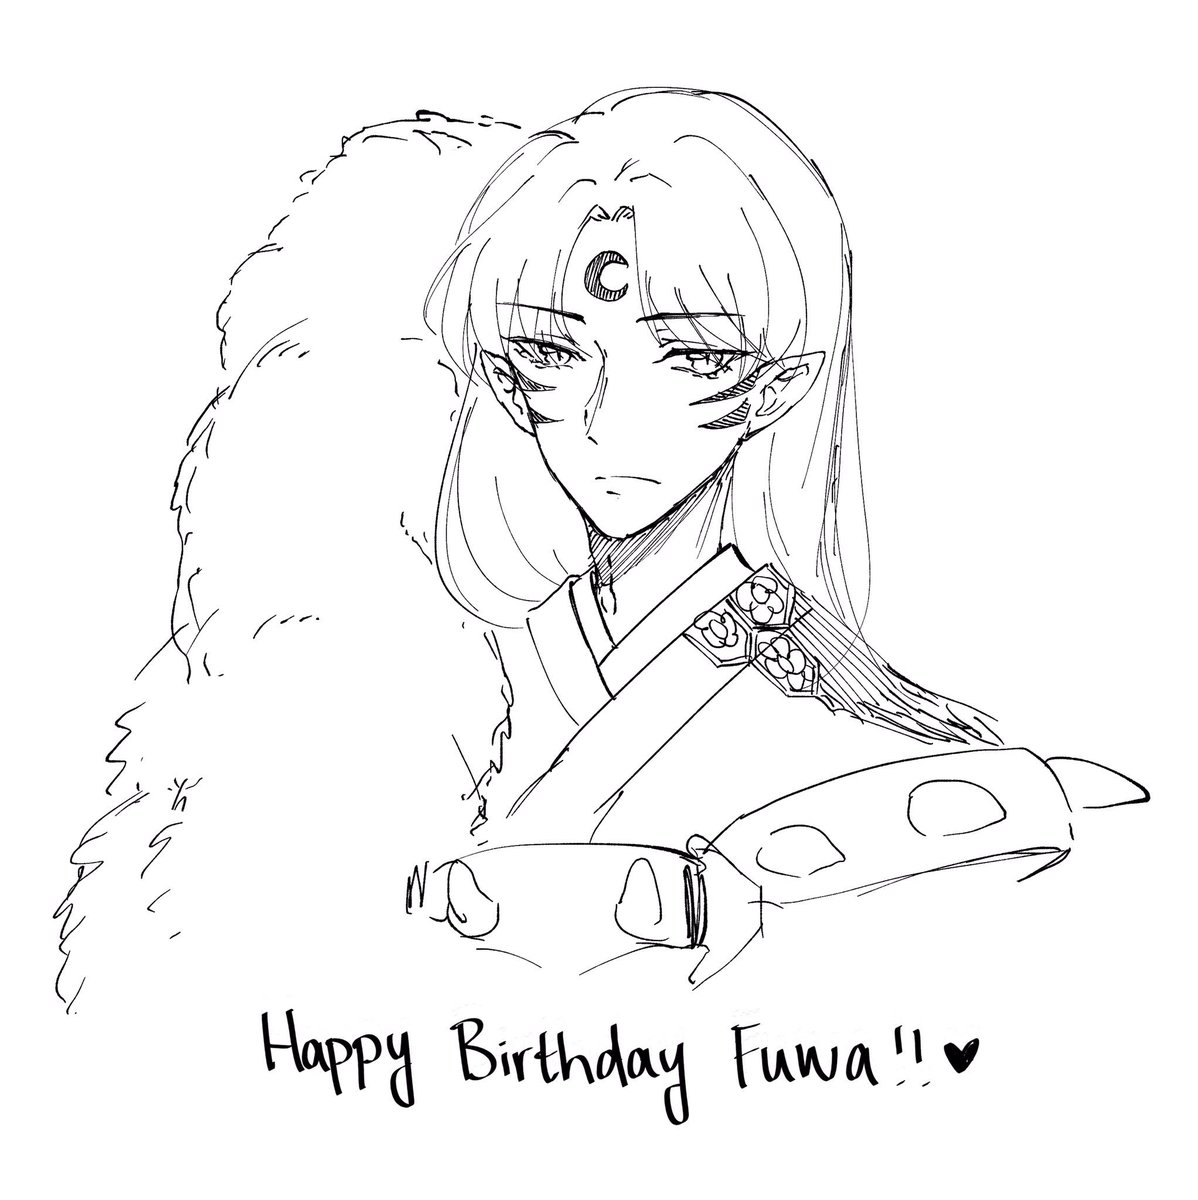 Happy birthday @fuwaffy ???!!! Im sorry all i managed to squeeze out inbetween studying is ur husbu uwu 